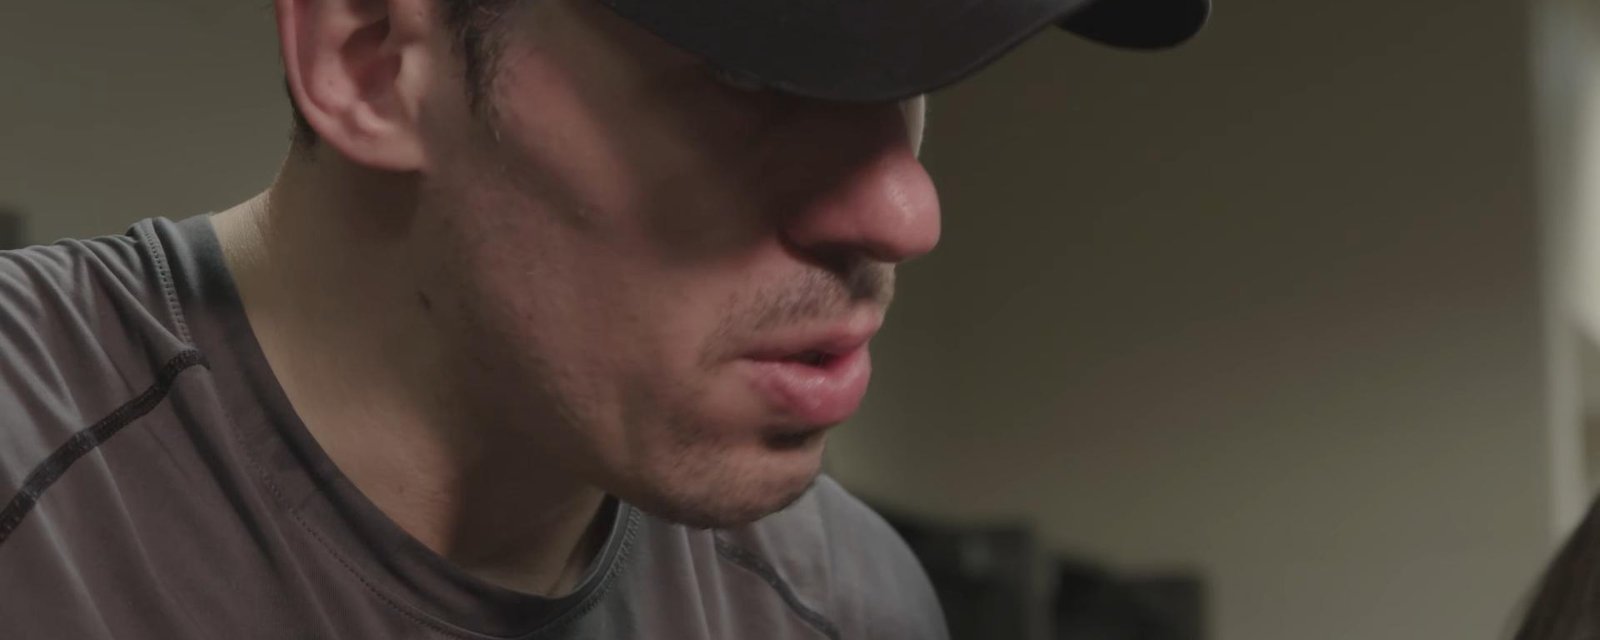 Evgeni Malkin makes heartbreaking admission before tonight’s game